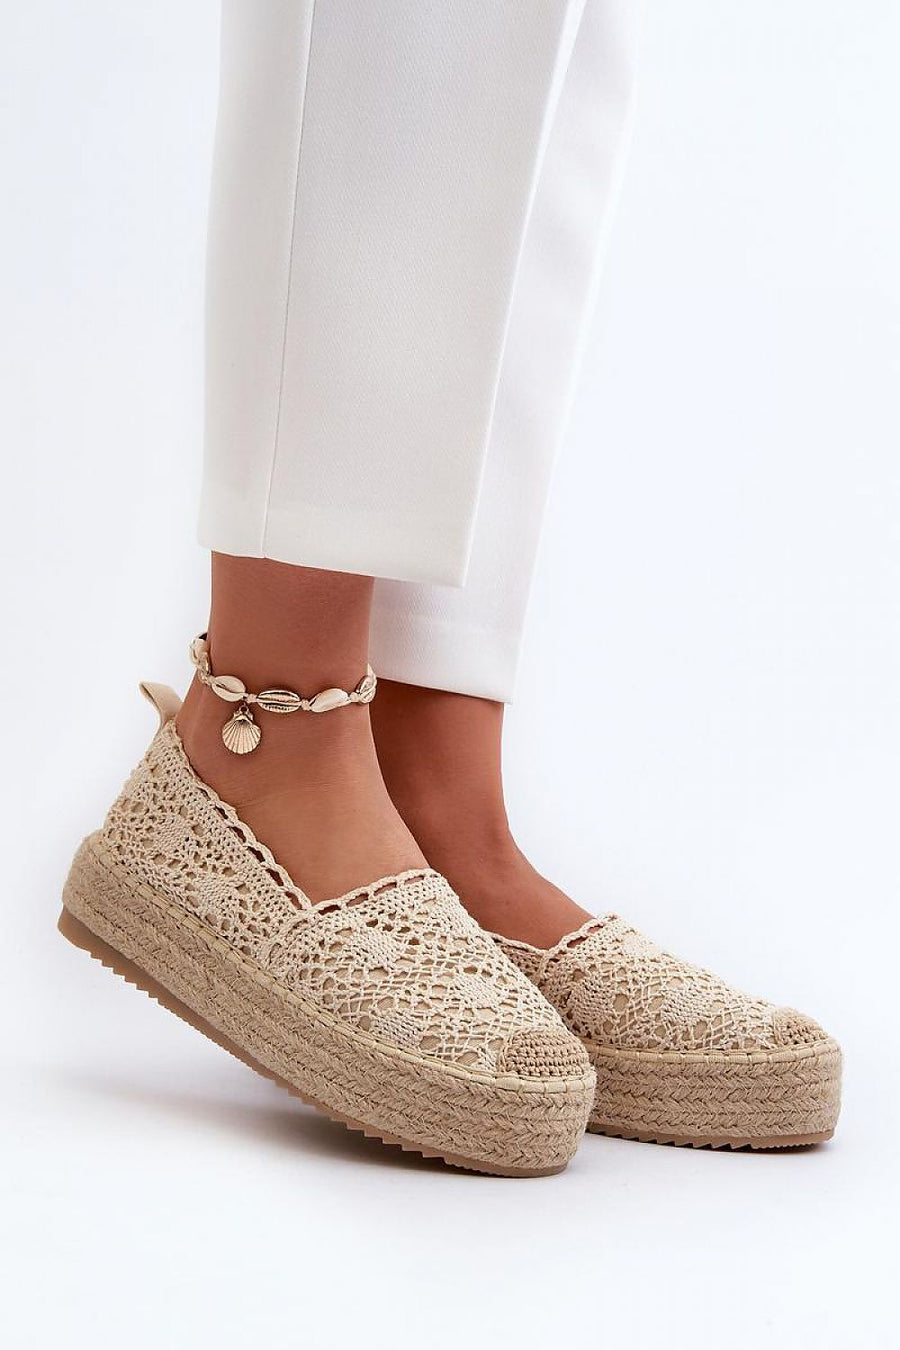 Espadrilles Model 197137 Step in style